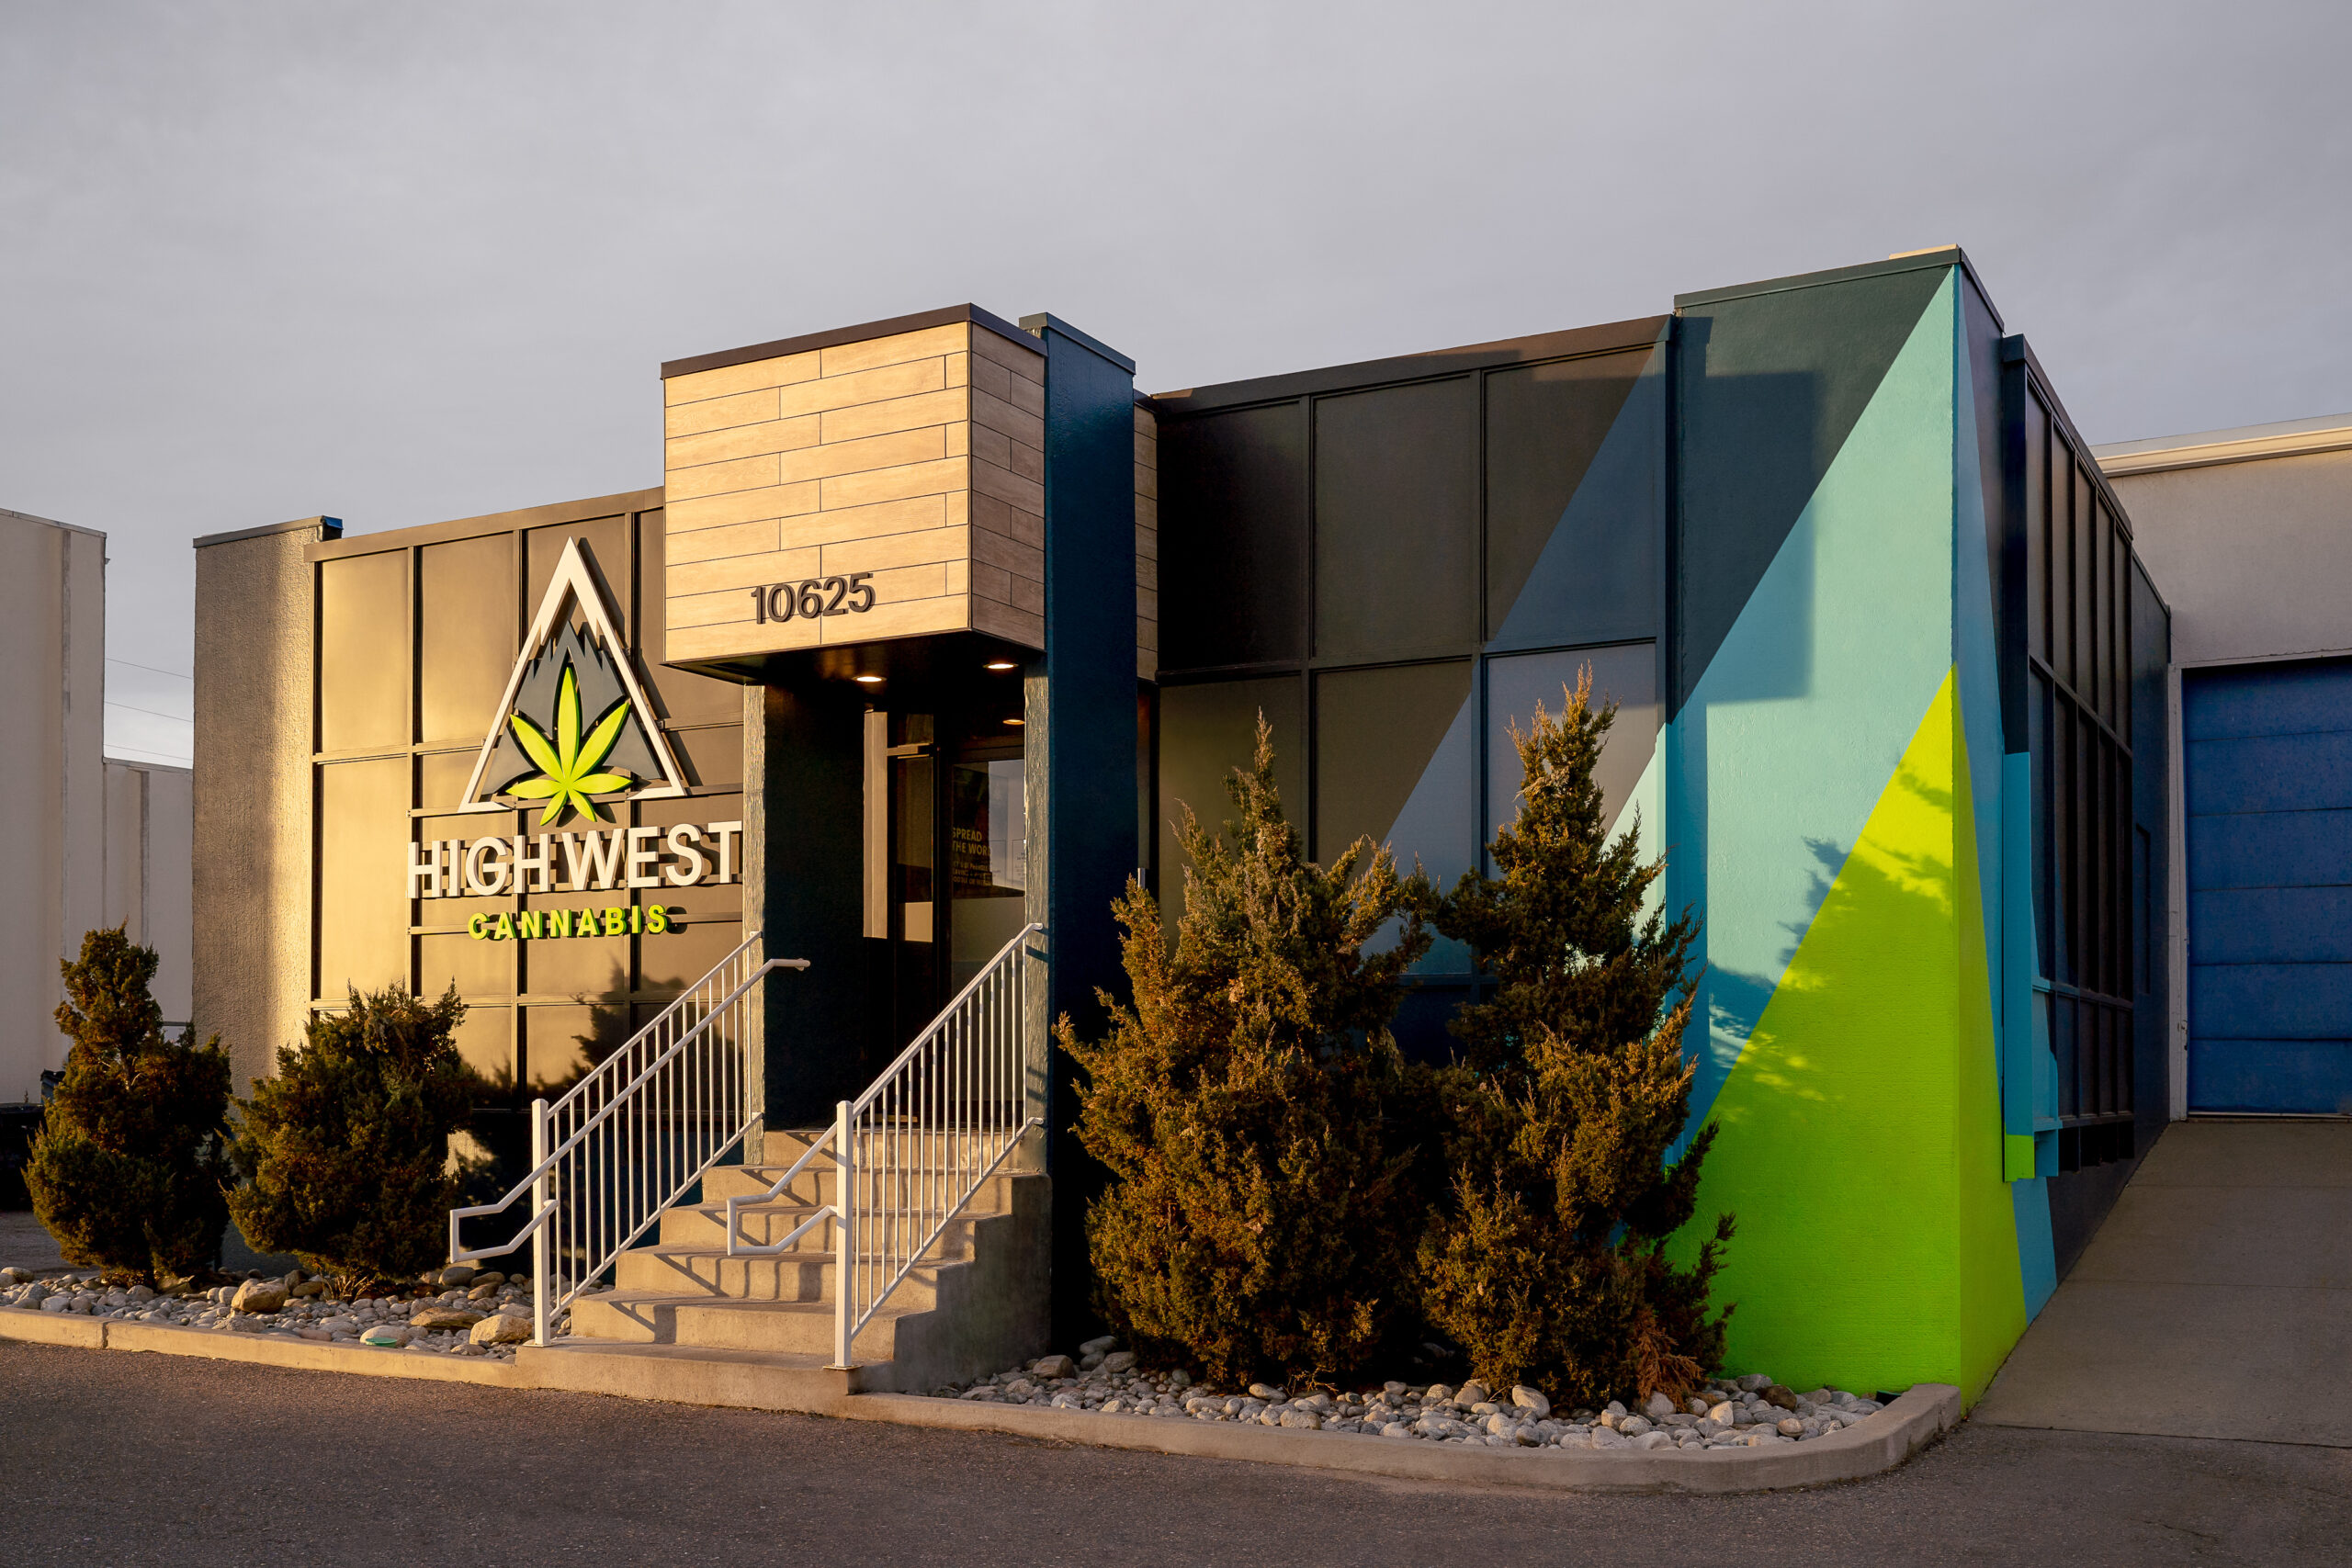 outside a rectangular dispensary building with pine trees in the front and a staircase leading inside